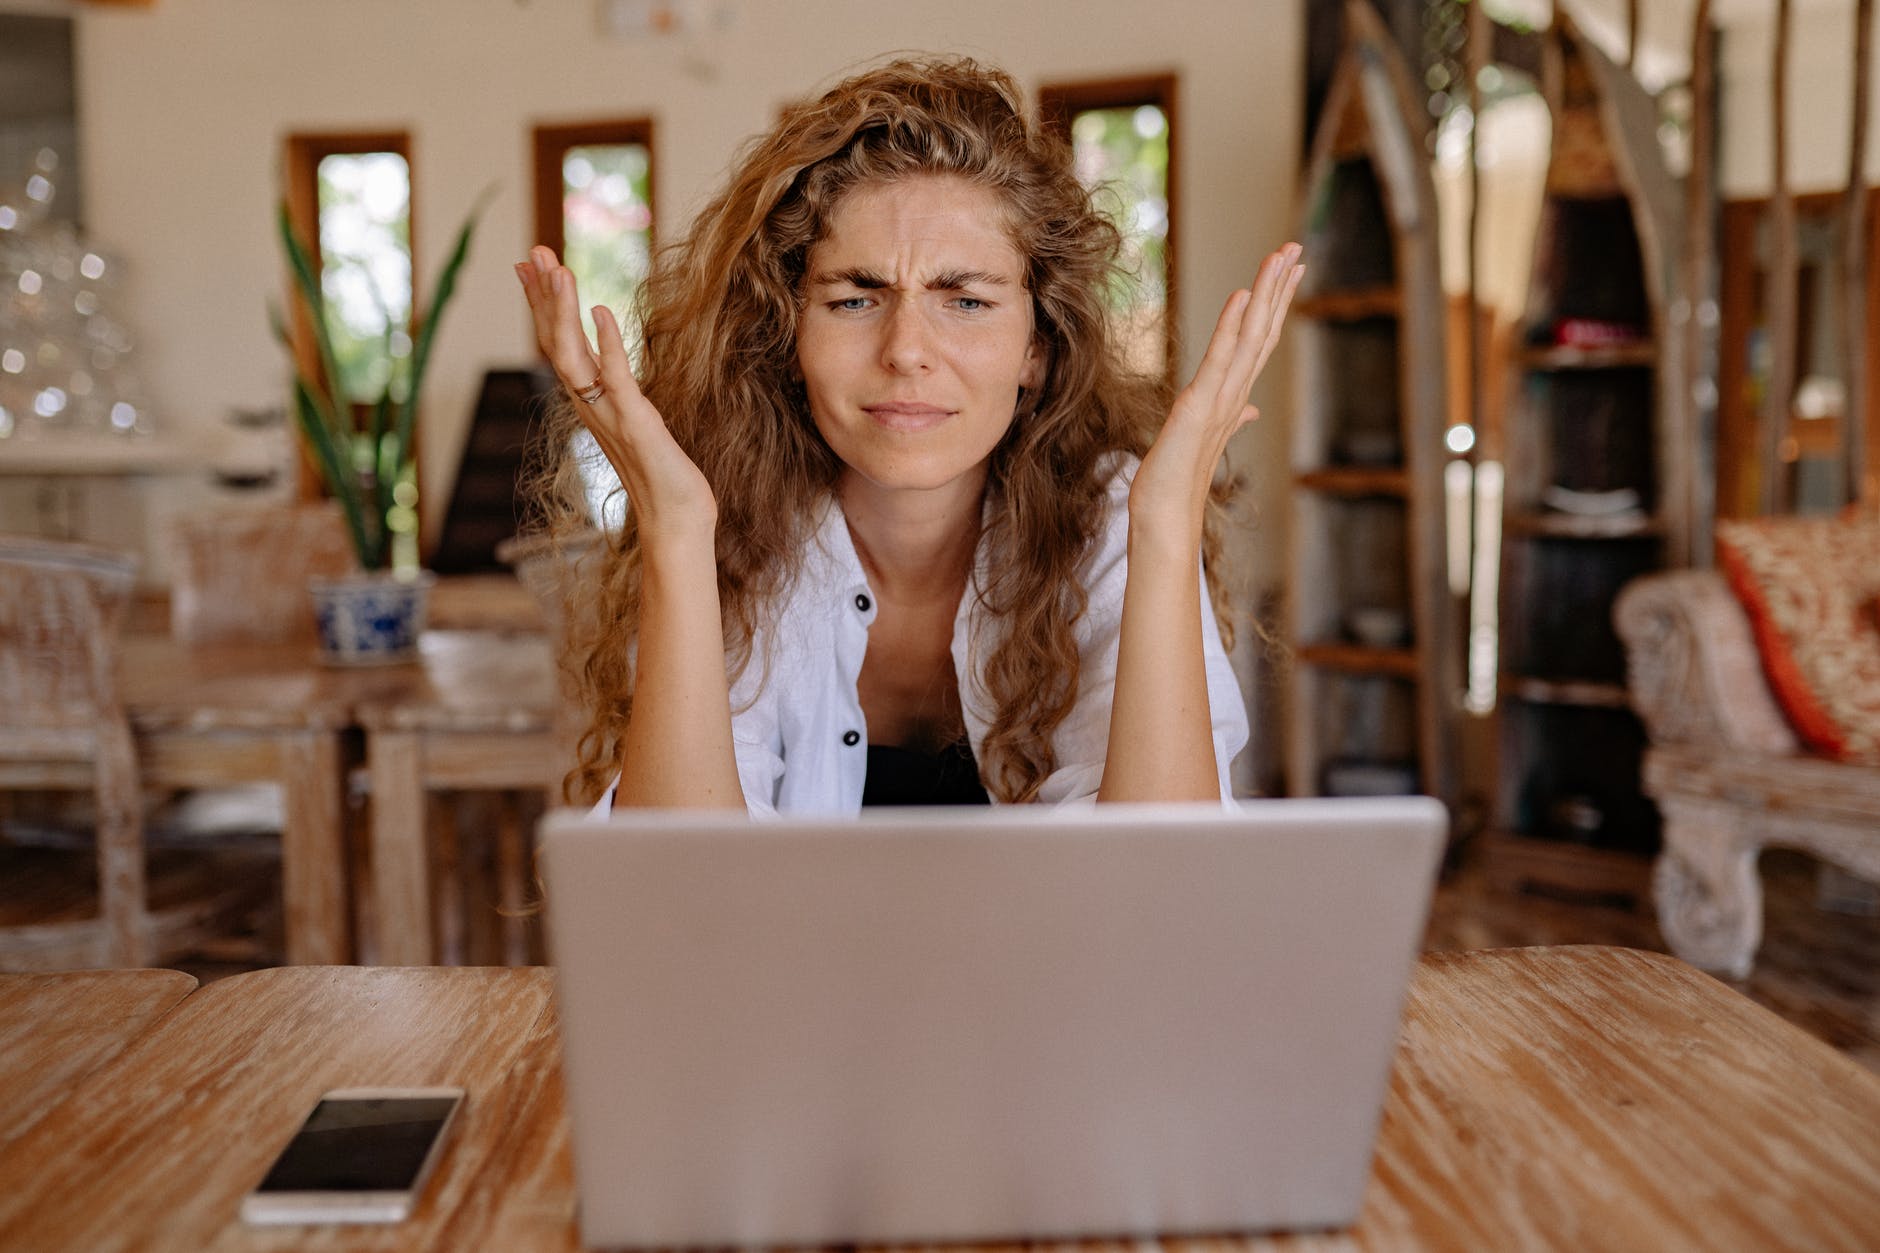 A frustrated woman throwing her hands up at her laptop